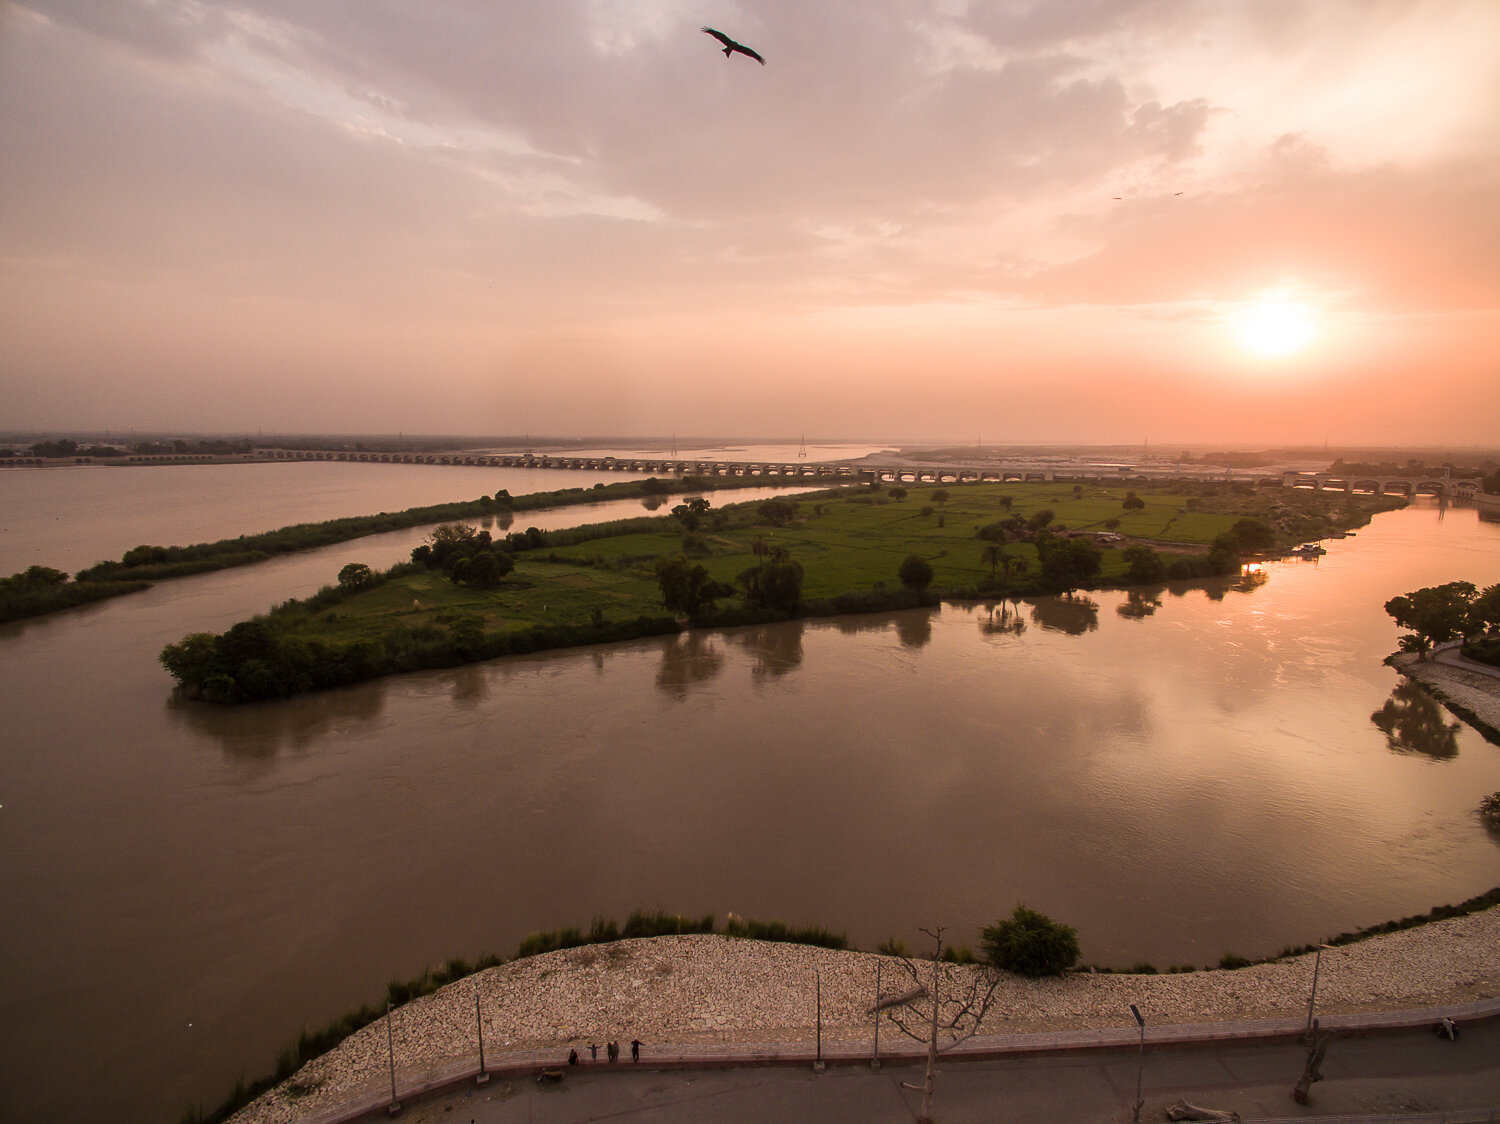  The Indus River and Sukkur Barrage are seen from a drone on Wednesday, October 2, 2019 in Sukkur, Sindh, Pakistan. The Sukkur Barrage helps supply water to the world's largest network of irrigation canals - more than 6000 miles worth. Excessive wate